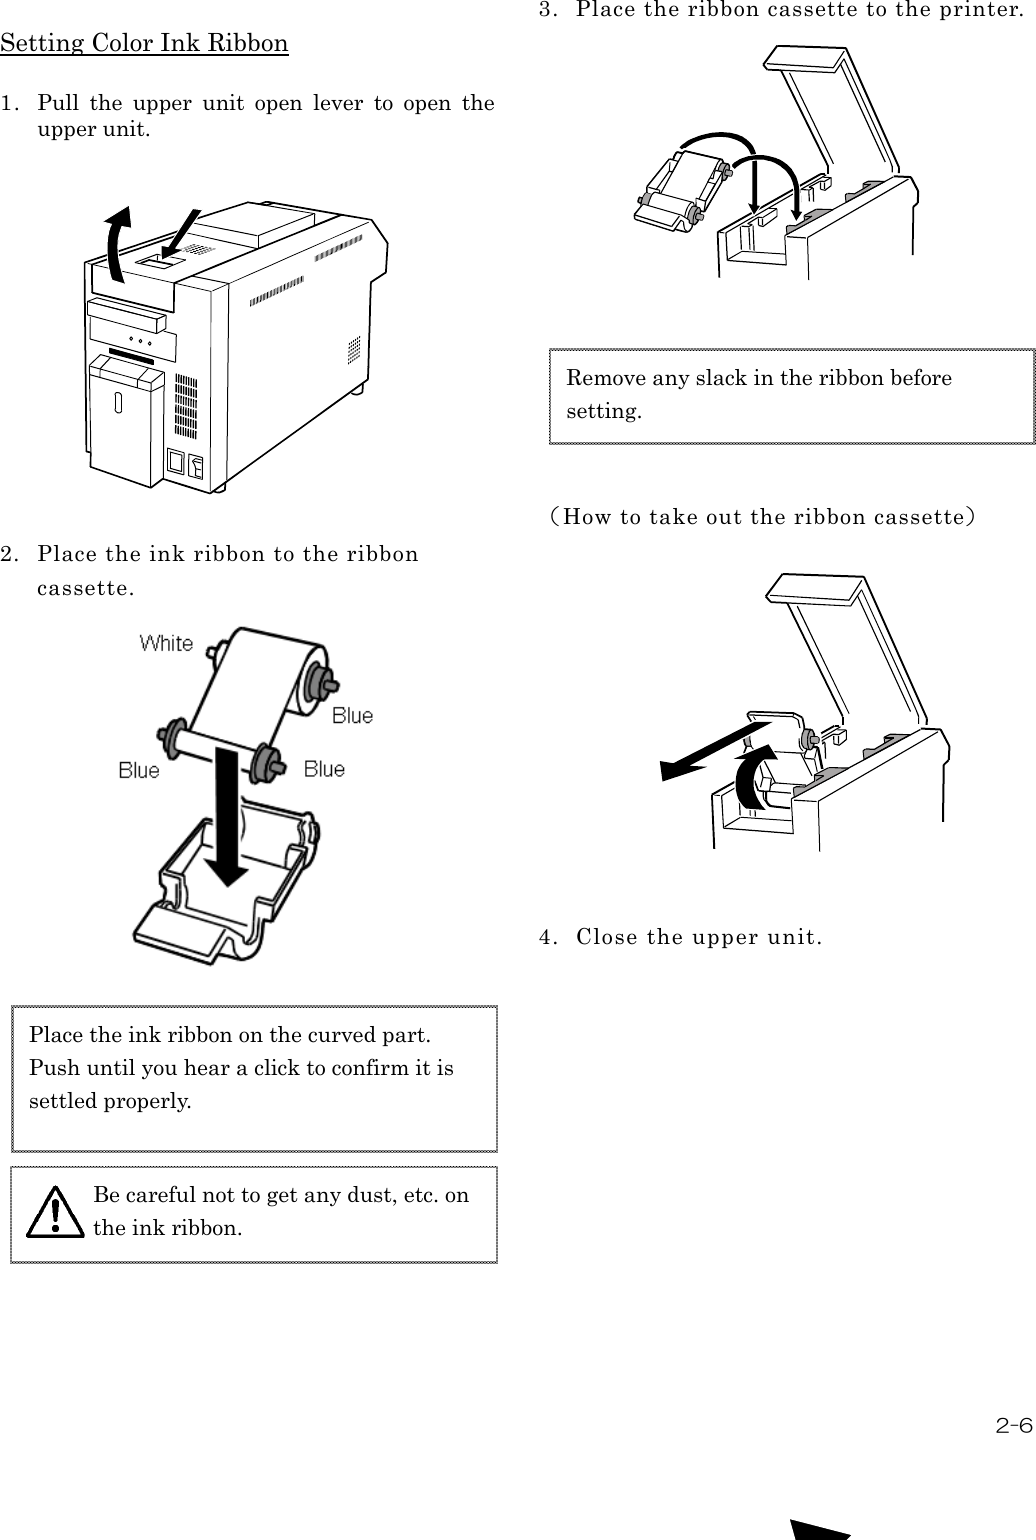  2-6  Setting Color Ink Ribbon  1. Pull  the  upper  unit  open  lever  to  open  the upper unit.              2. Place the ink ribbon to the ribbon cassette.                           3. Place the ribbon cassette to the printer.                  （How to take out the ribbon cassette）                4. Close the upper unit.    Place the ink ribbon on the curved part.   Push until you hear a click to confirm it is settled properly.  Remove any slack in the ribbon before setting. Be careful not to get any dust, etc. on the ink ribbon.  